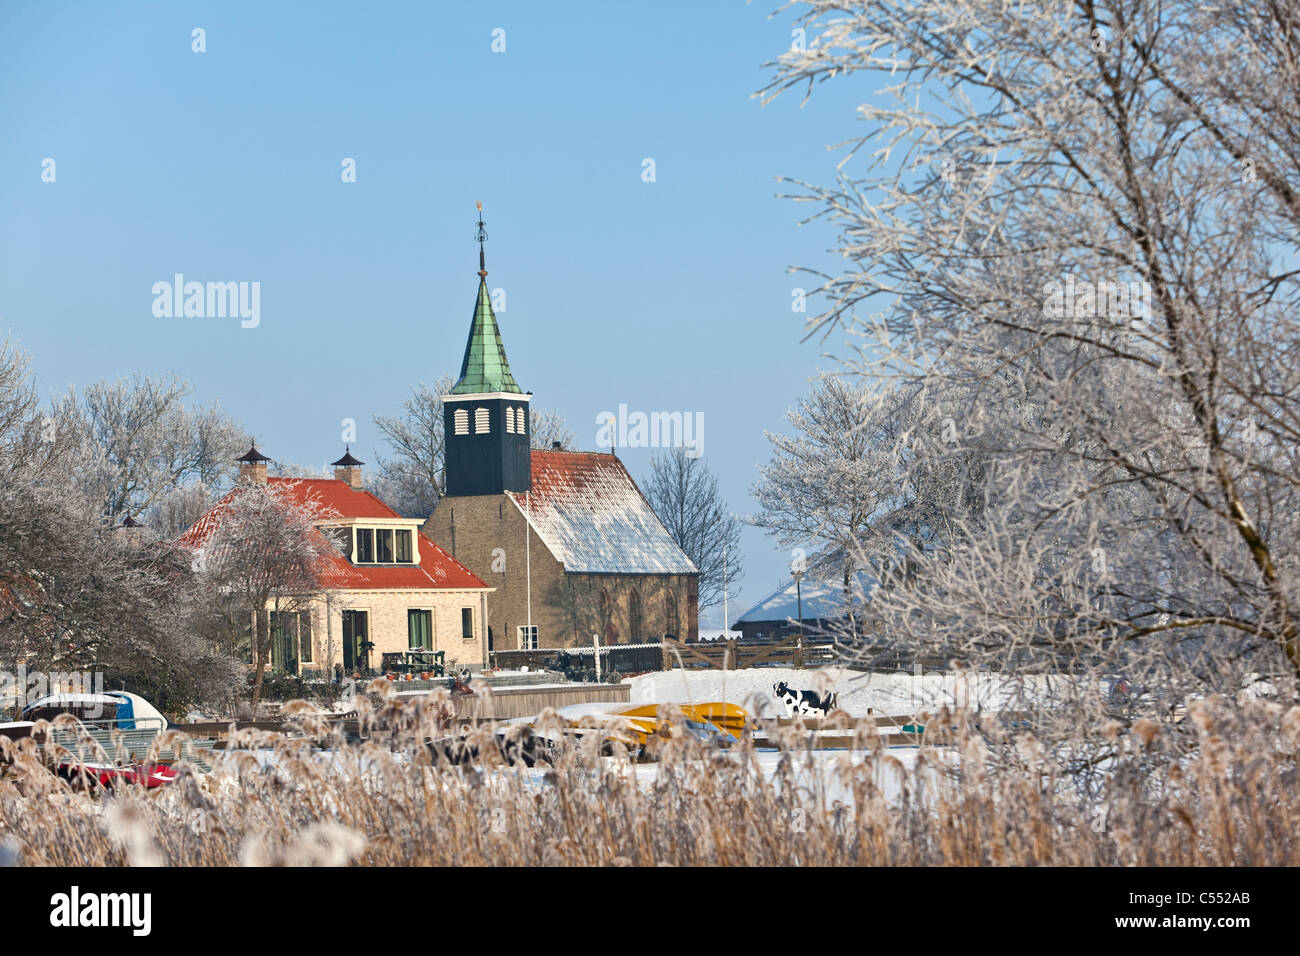 The Netherlands, Piaam, View of church and houses in frost and snow. Stock Photo